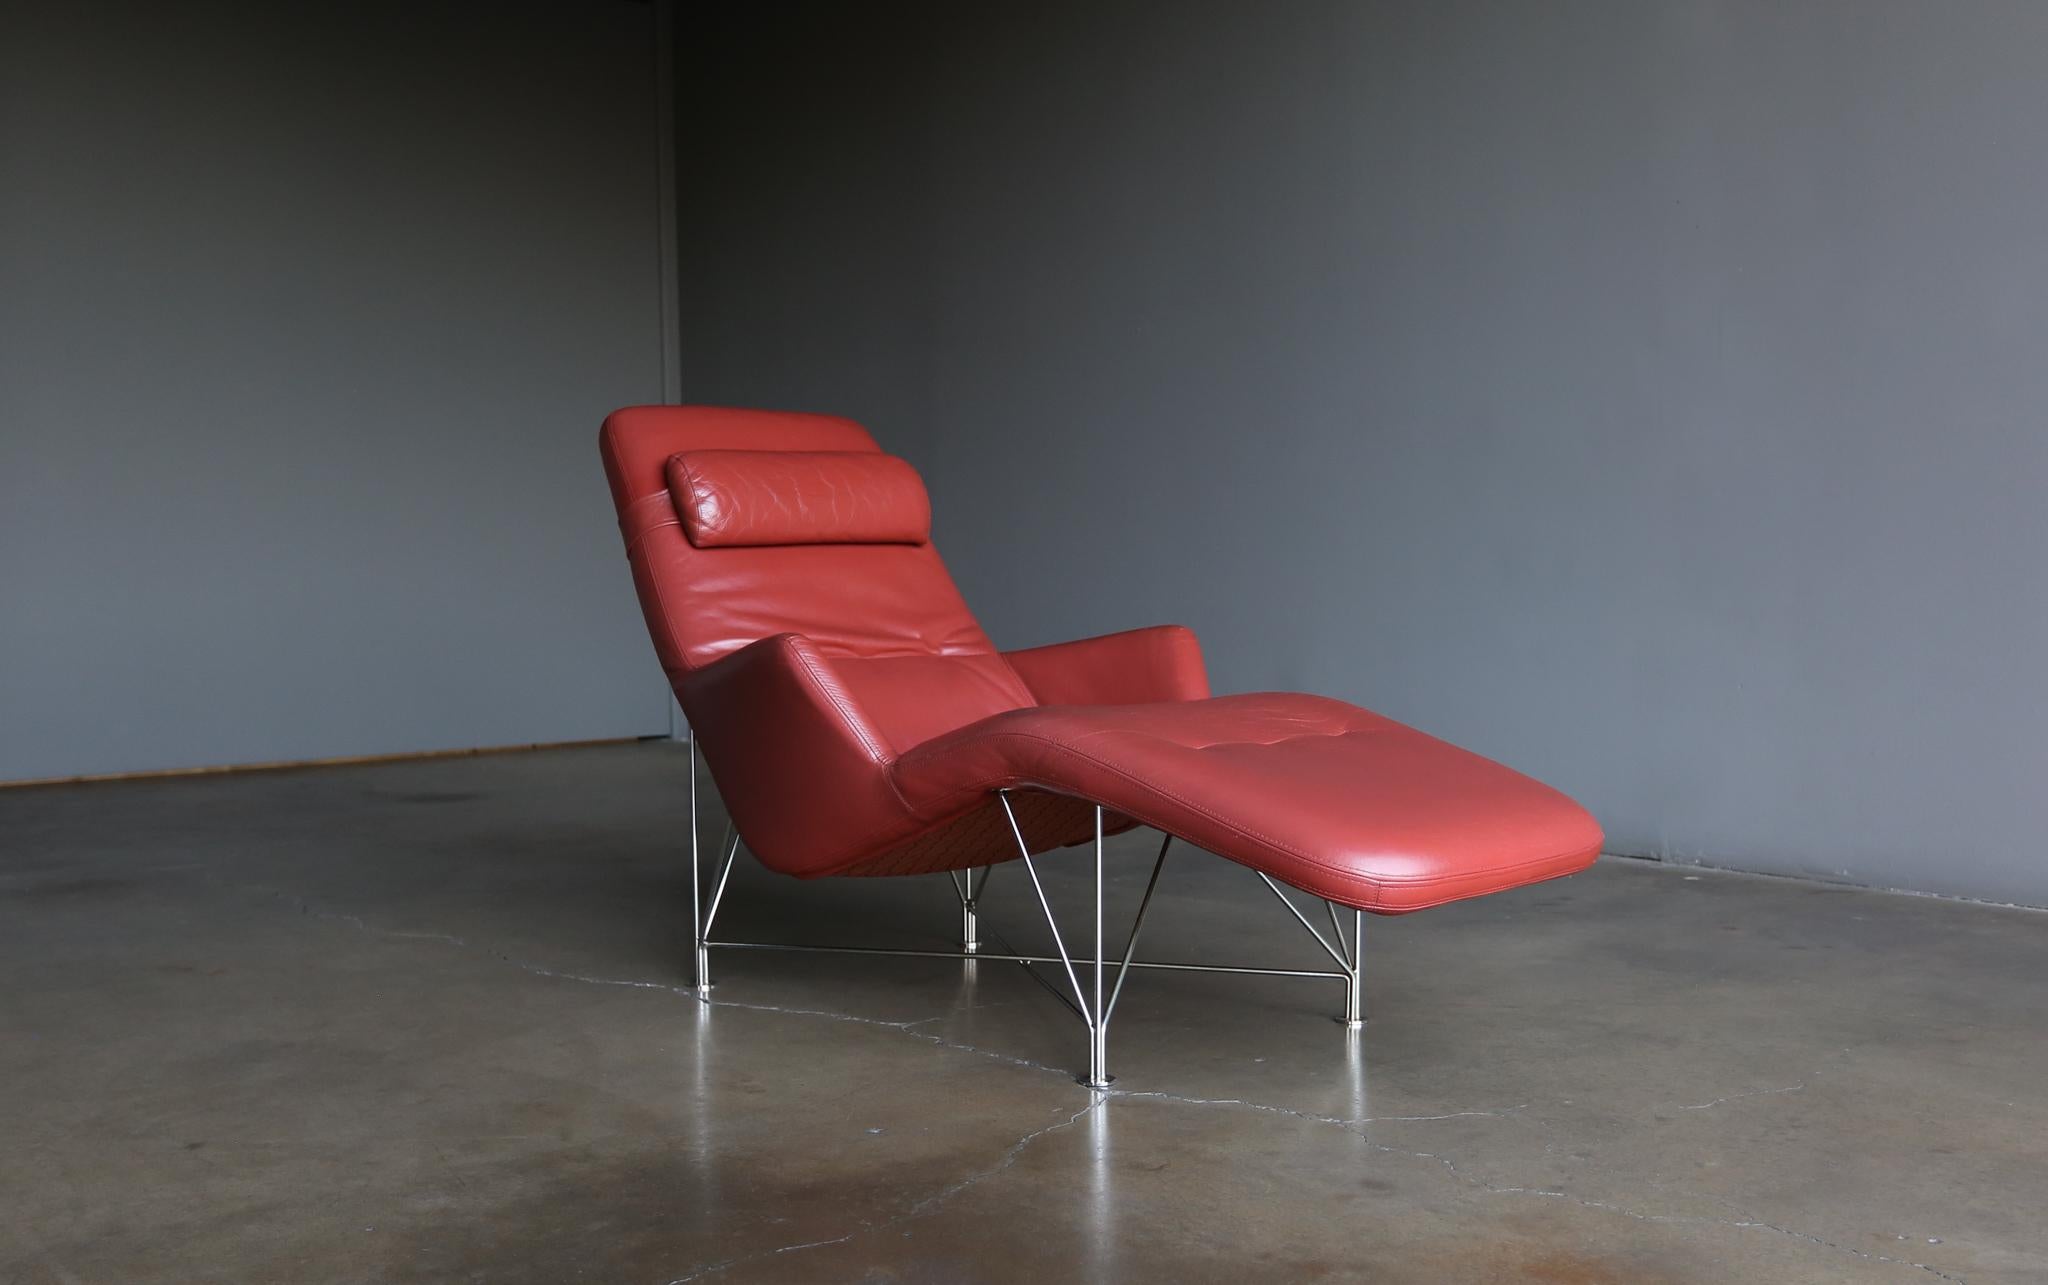 Kenneth Bergenblad superspider leather lounge chair for DUX, circa 1987.